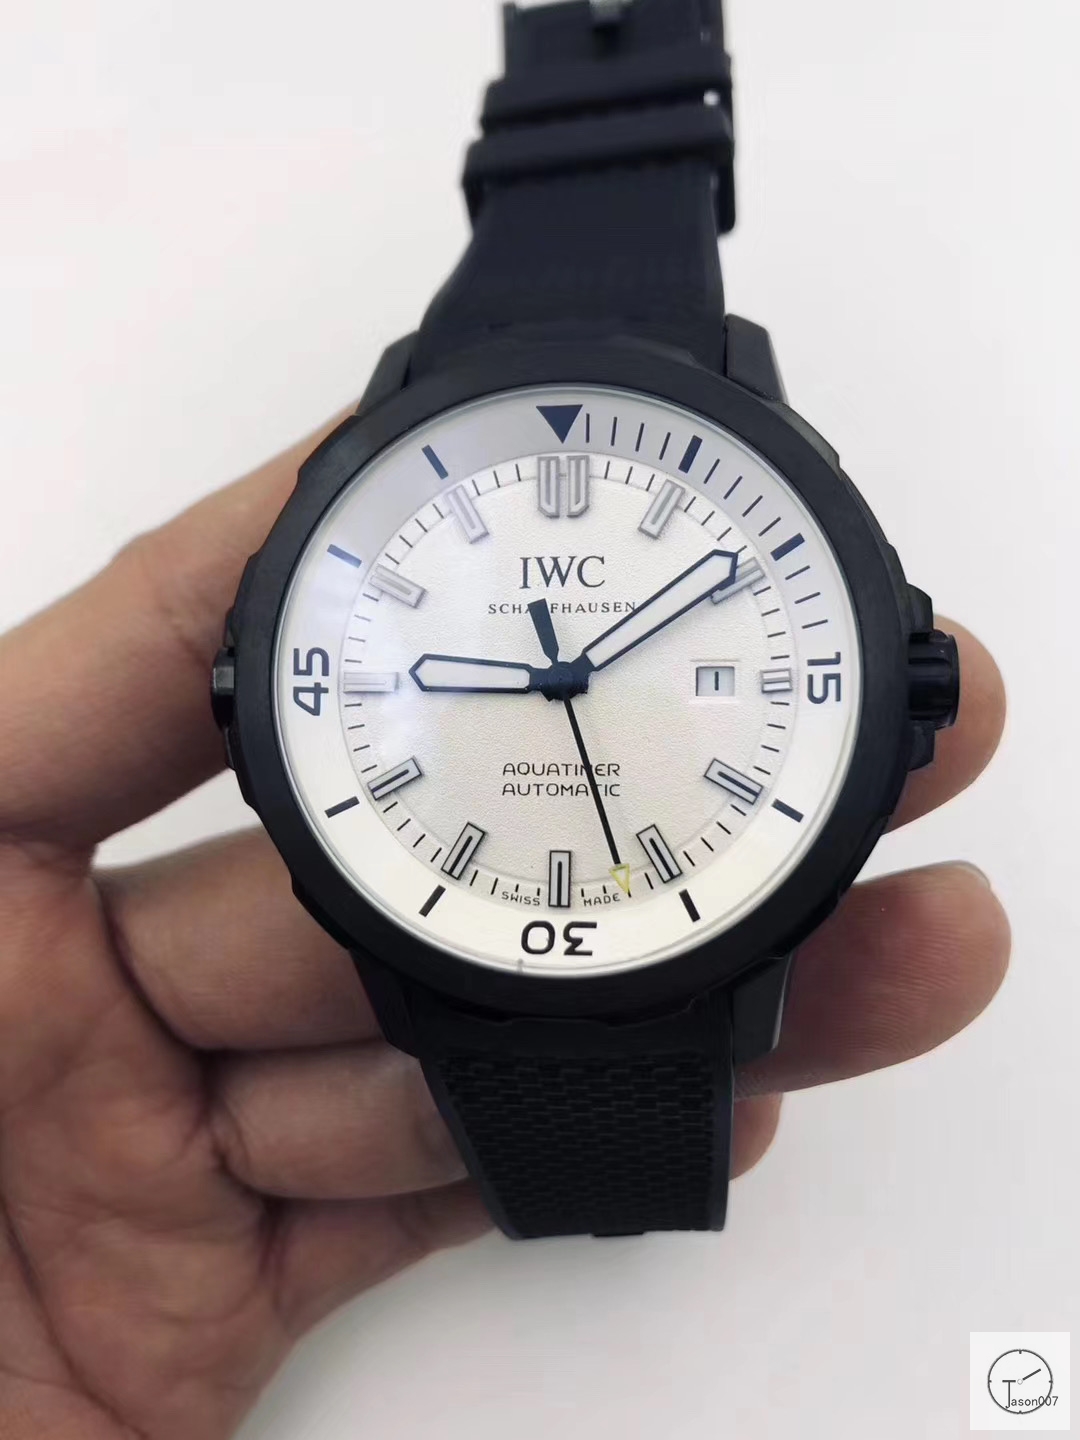 IWC AQUATIMER AUTOMATIC Mechical IW329001 42MM BLACK DIAL PVD Case Rubber Strap Mens Wristwatches ICW22040560